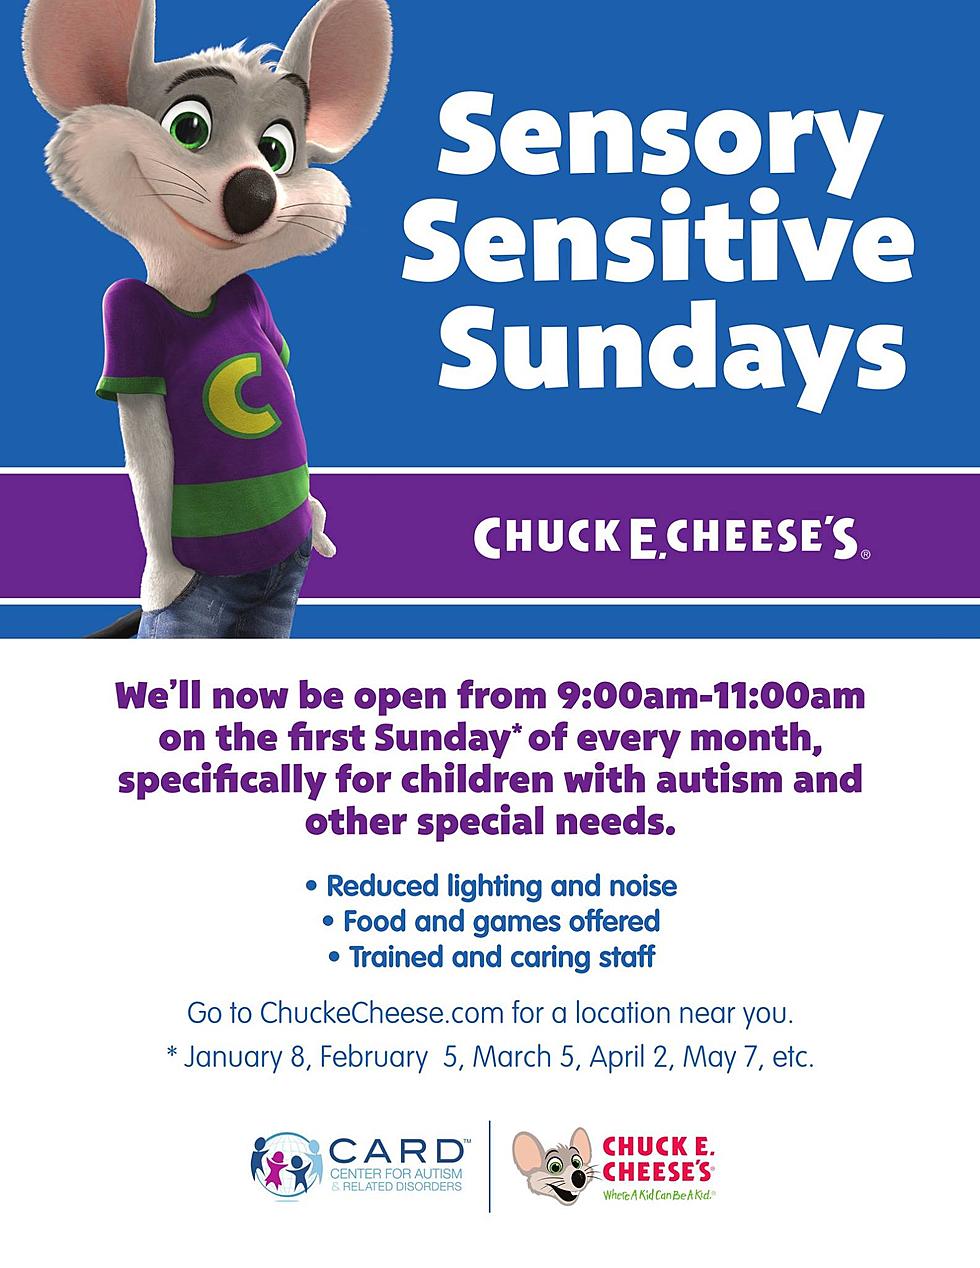 Dartmouth Chuck E. Cheese to Host Events for Children with Autism